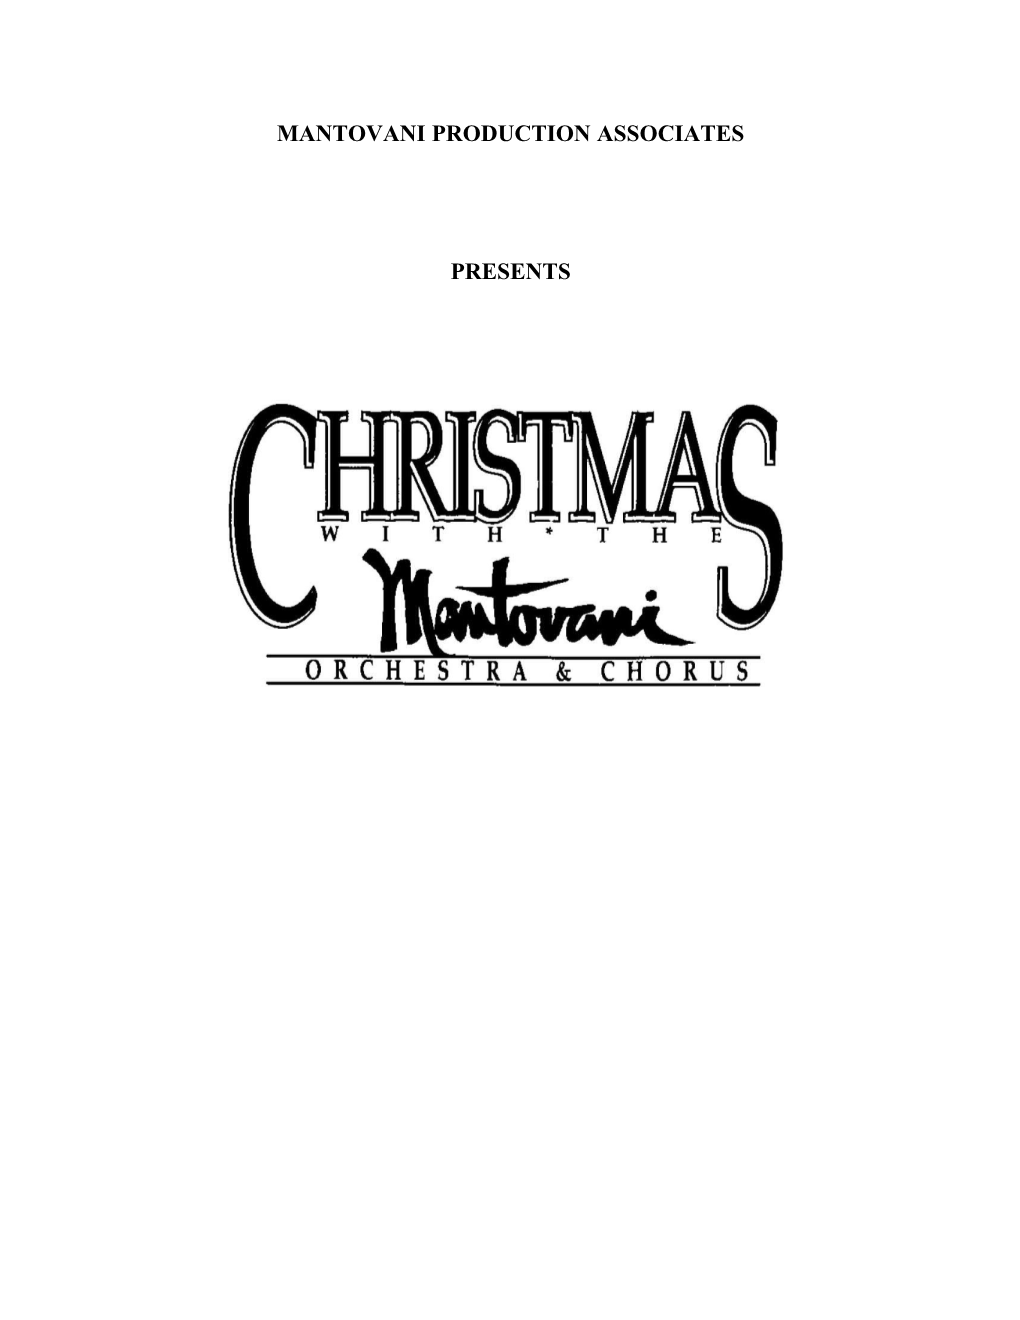 Christmas with the Mantovani Orchestra and Chorus